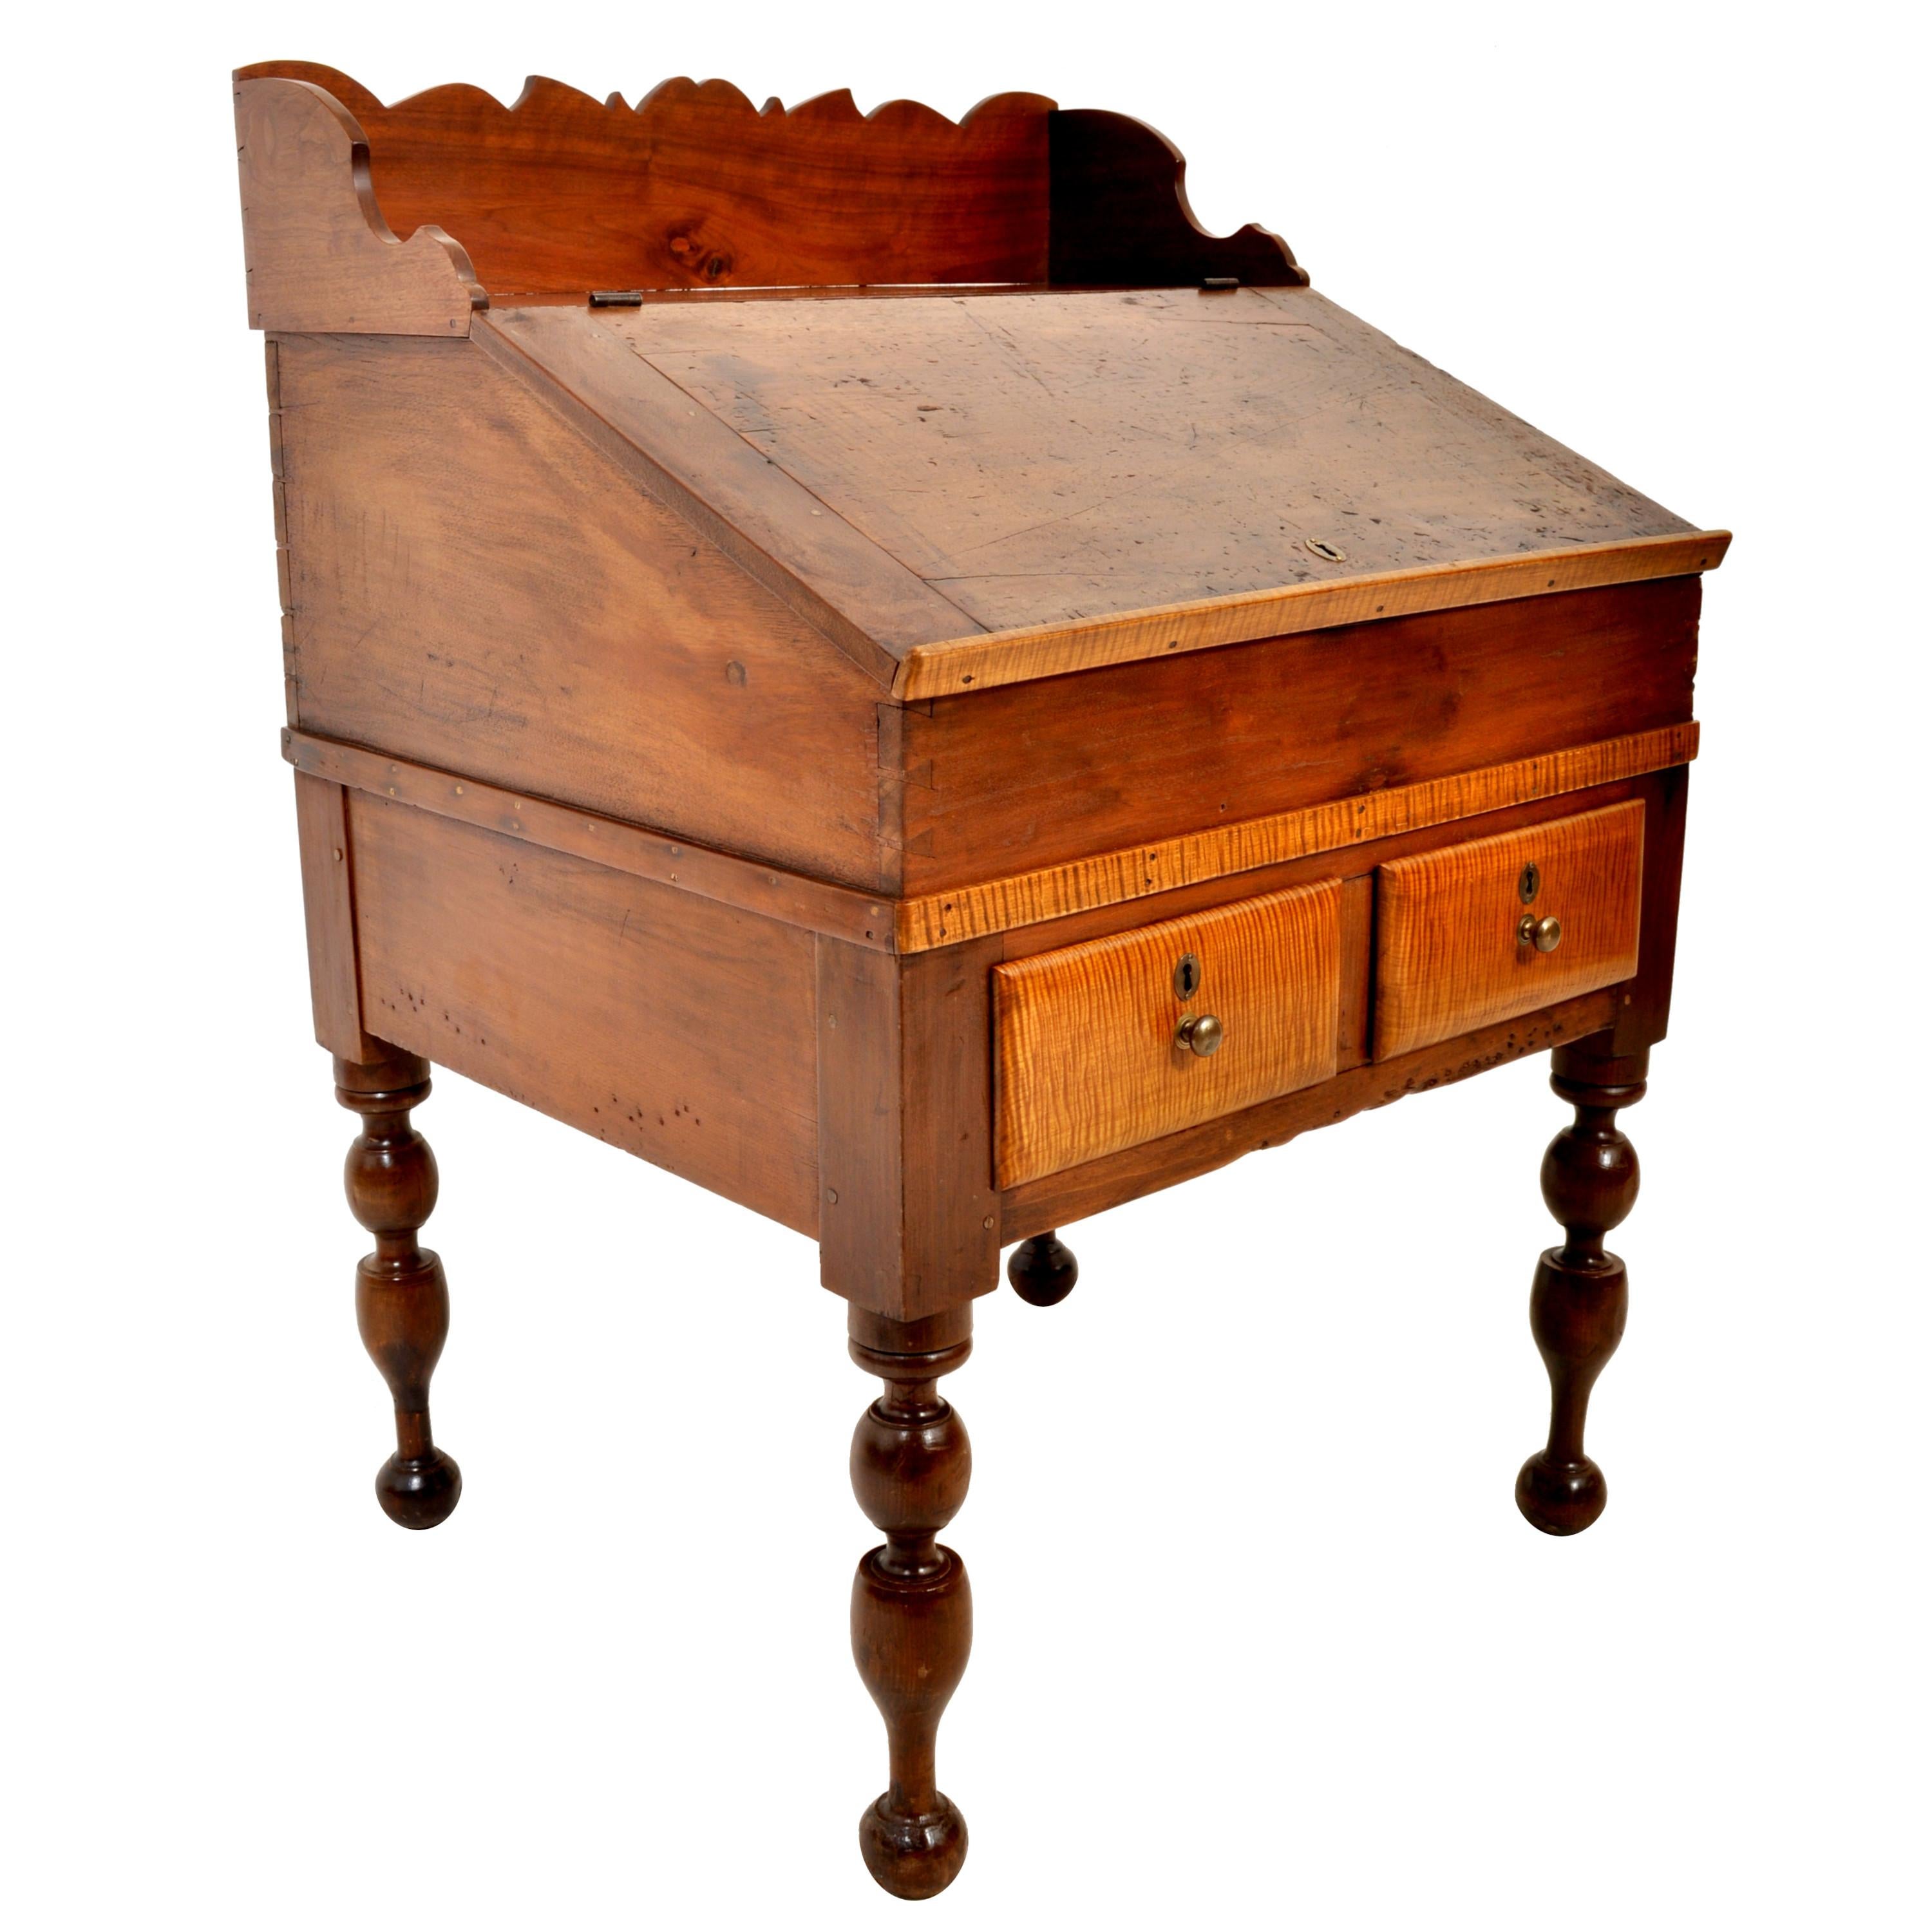 Antique cherry and tiger maple New England, Sheraton, plantation desk/secretary, circa 1820. To the back is a shaped gallery, below is a slant front hinged writing surface enclosing drawers and pigeon holes, the base having two drawers, the desk